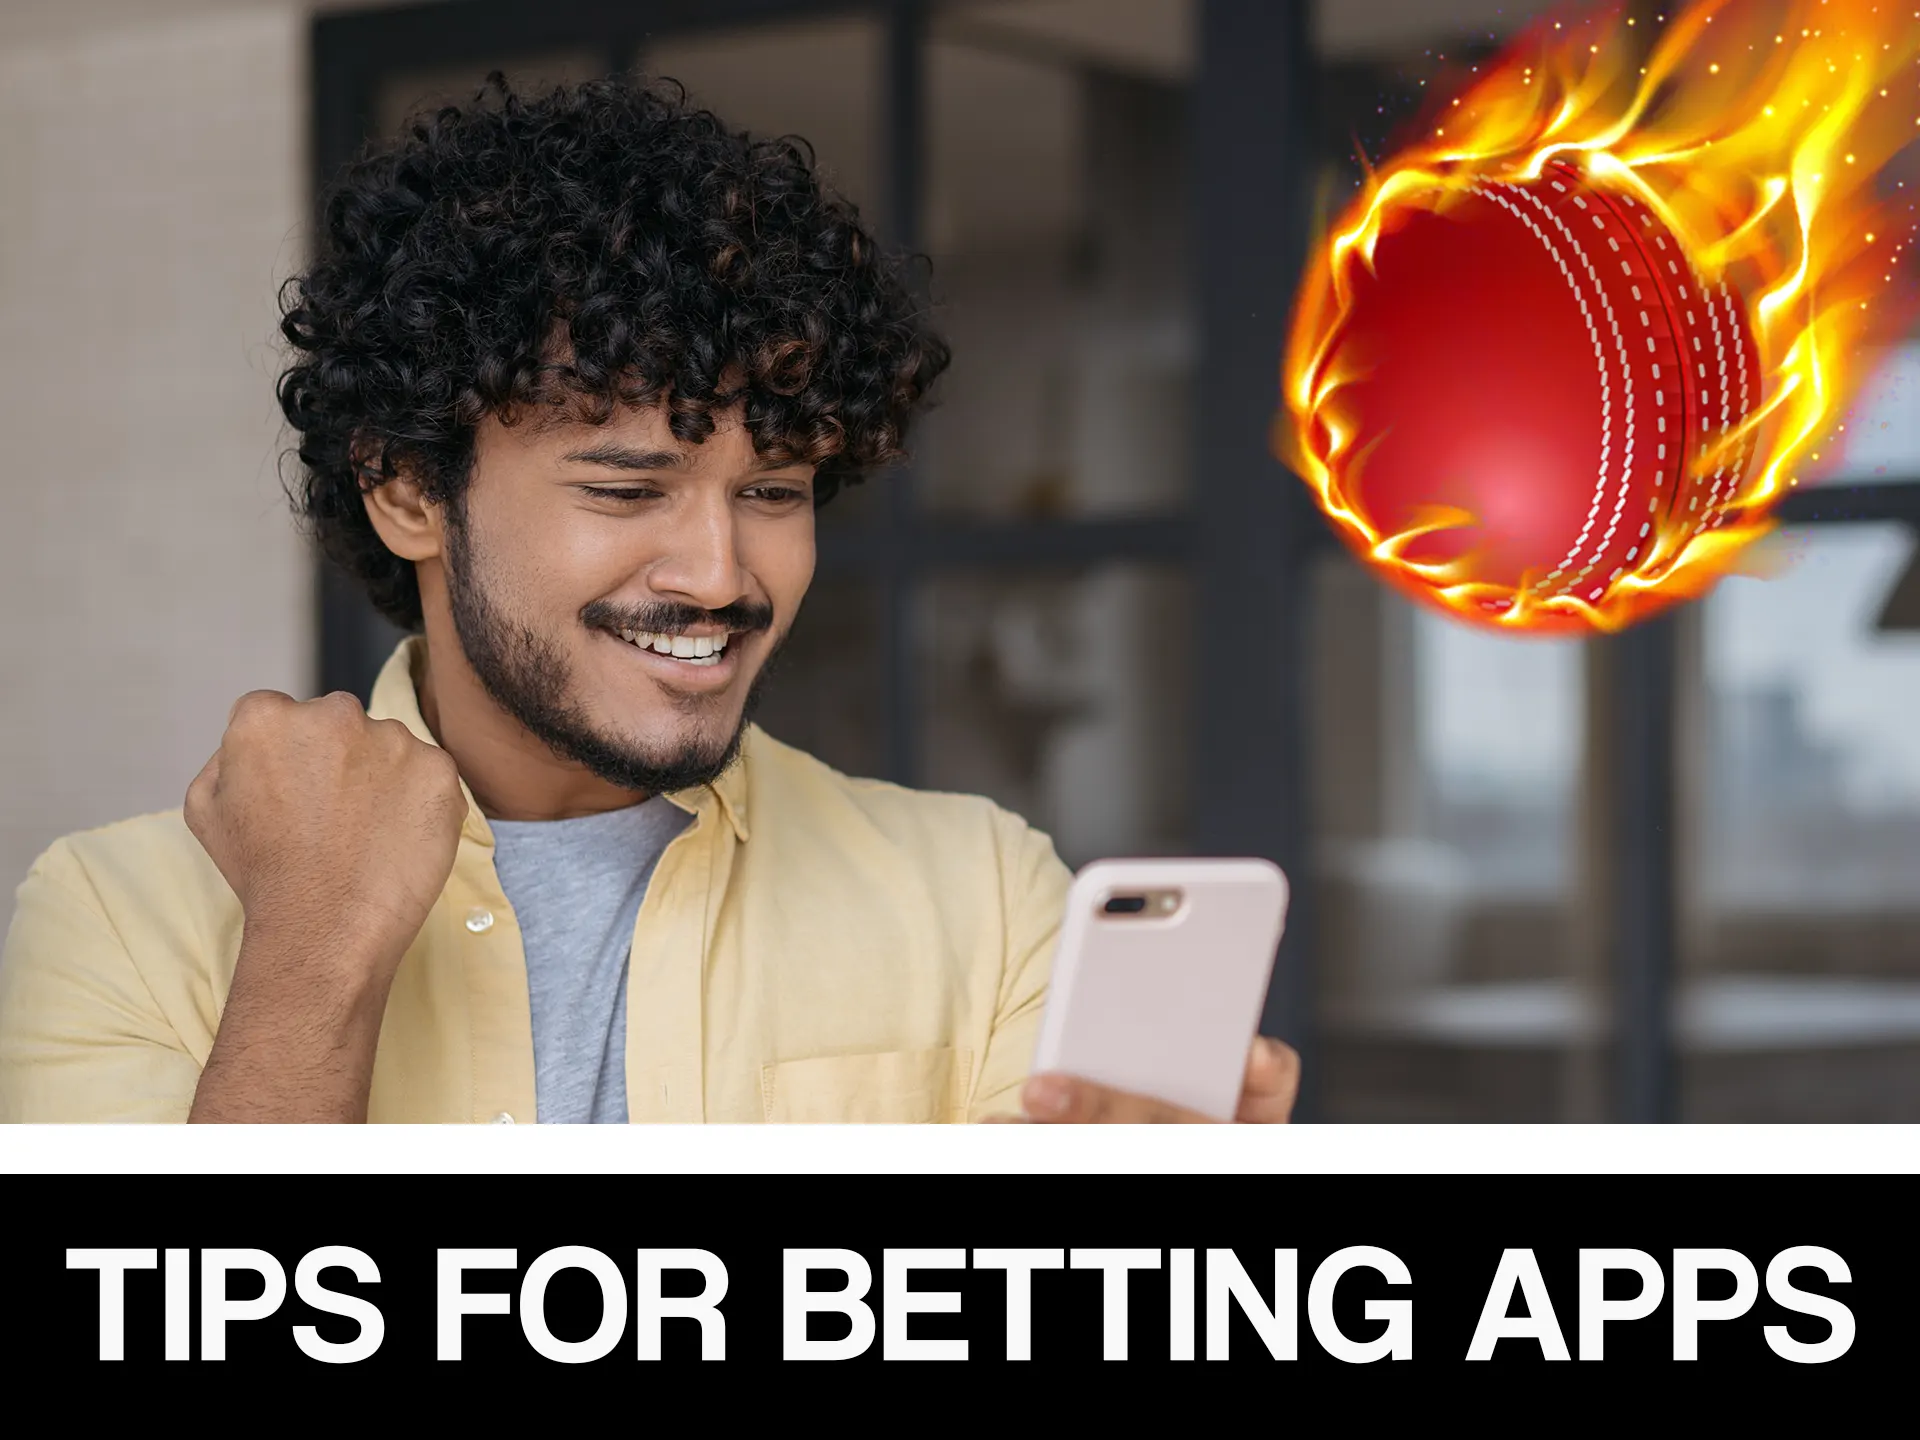 Use owr tips and make your bet in the app.